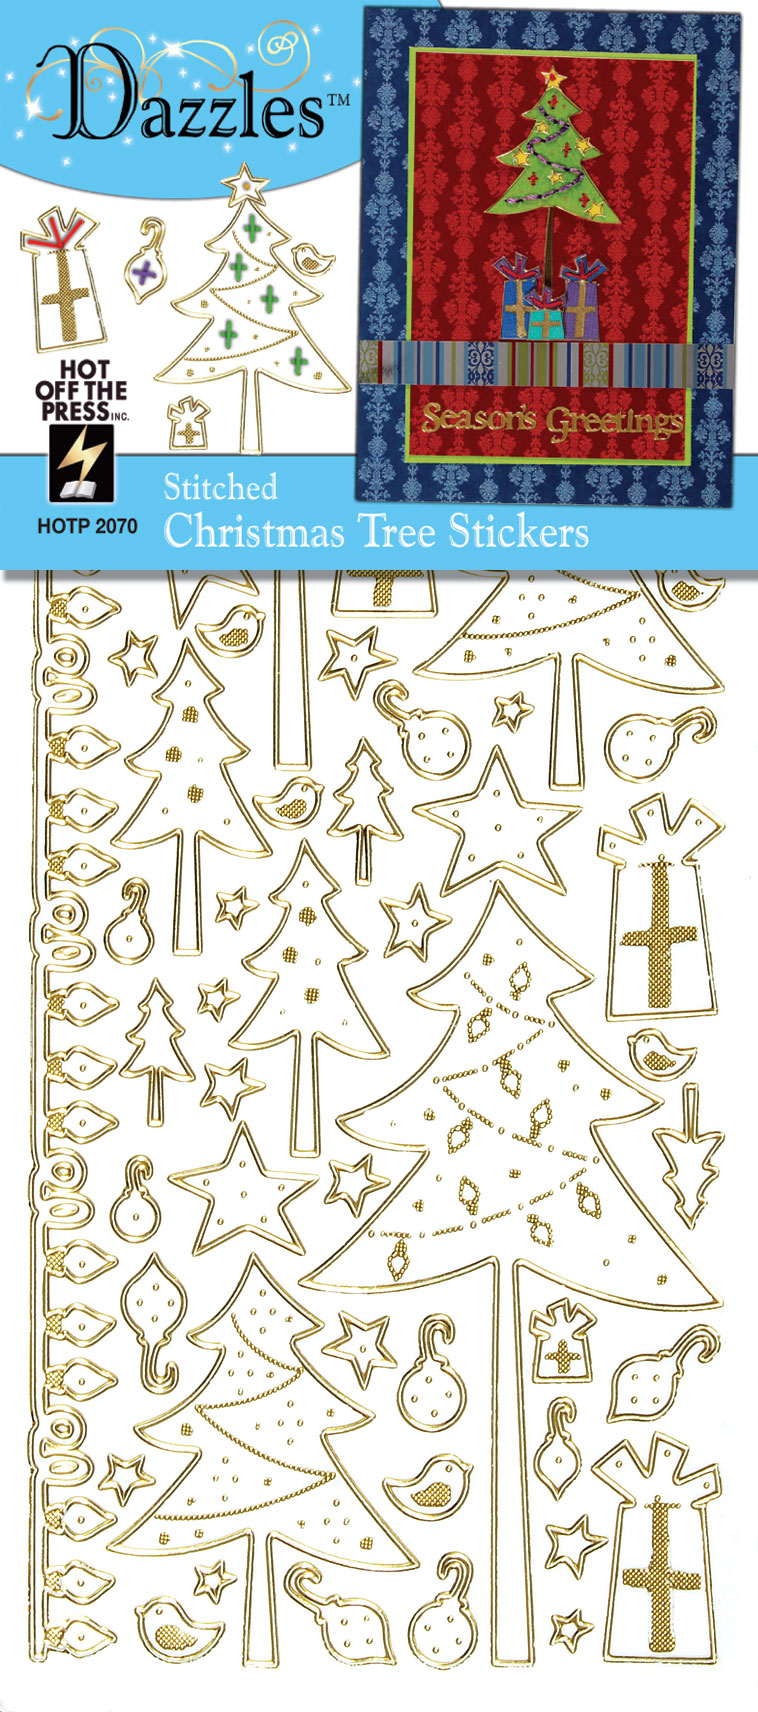 Stitched Christmas Trees Dazzles™ Stickers Gold